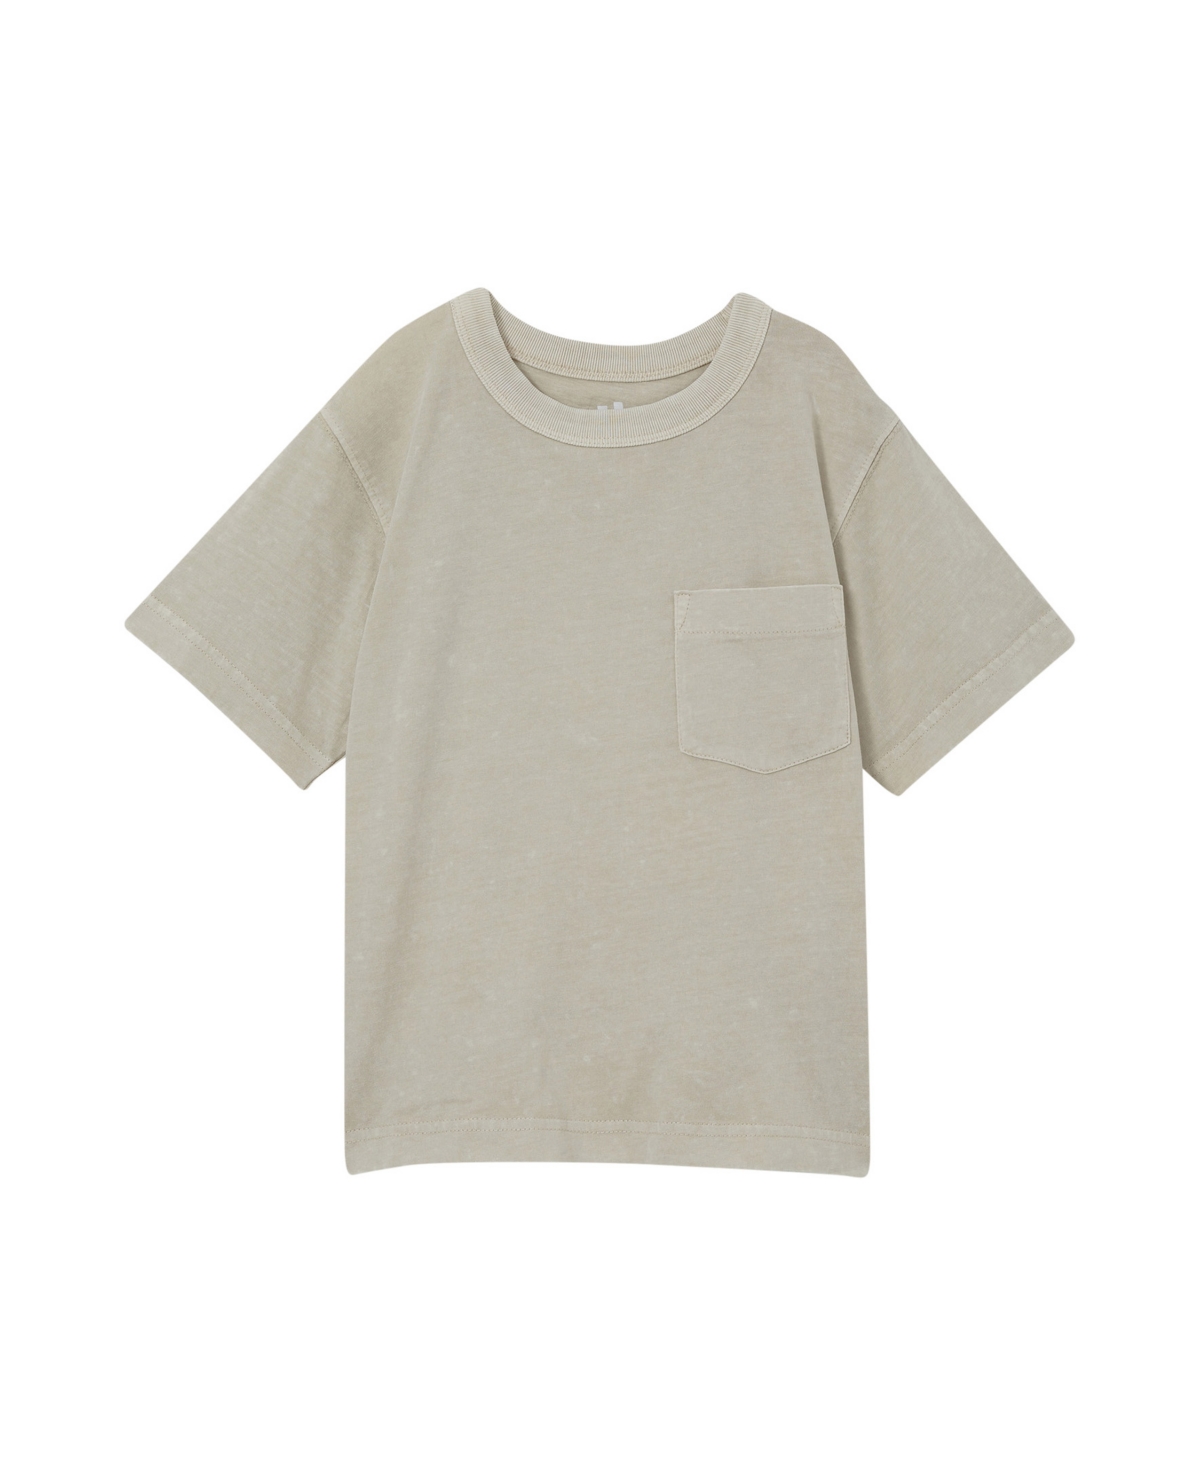 COTTON ON TODDLER AND LITTLE BOYS THE ESSENTIAL SHORT SLEEVE T-SHIRT